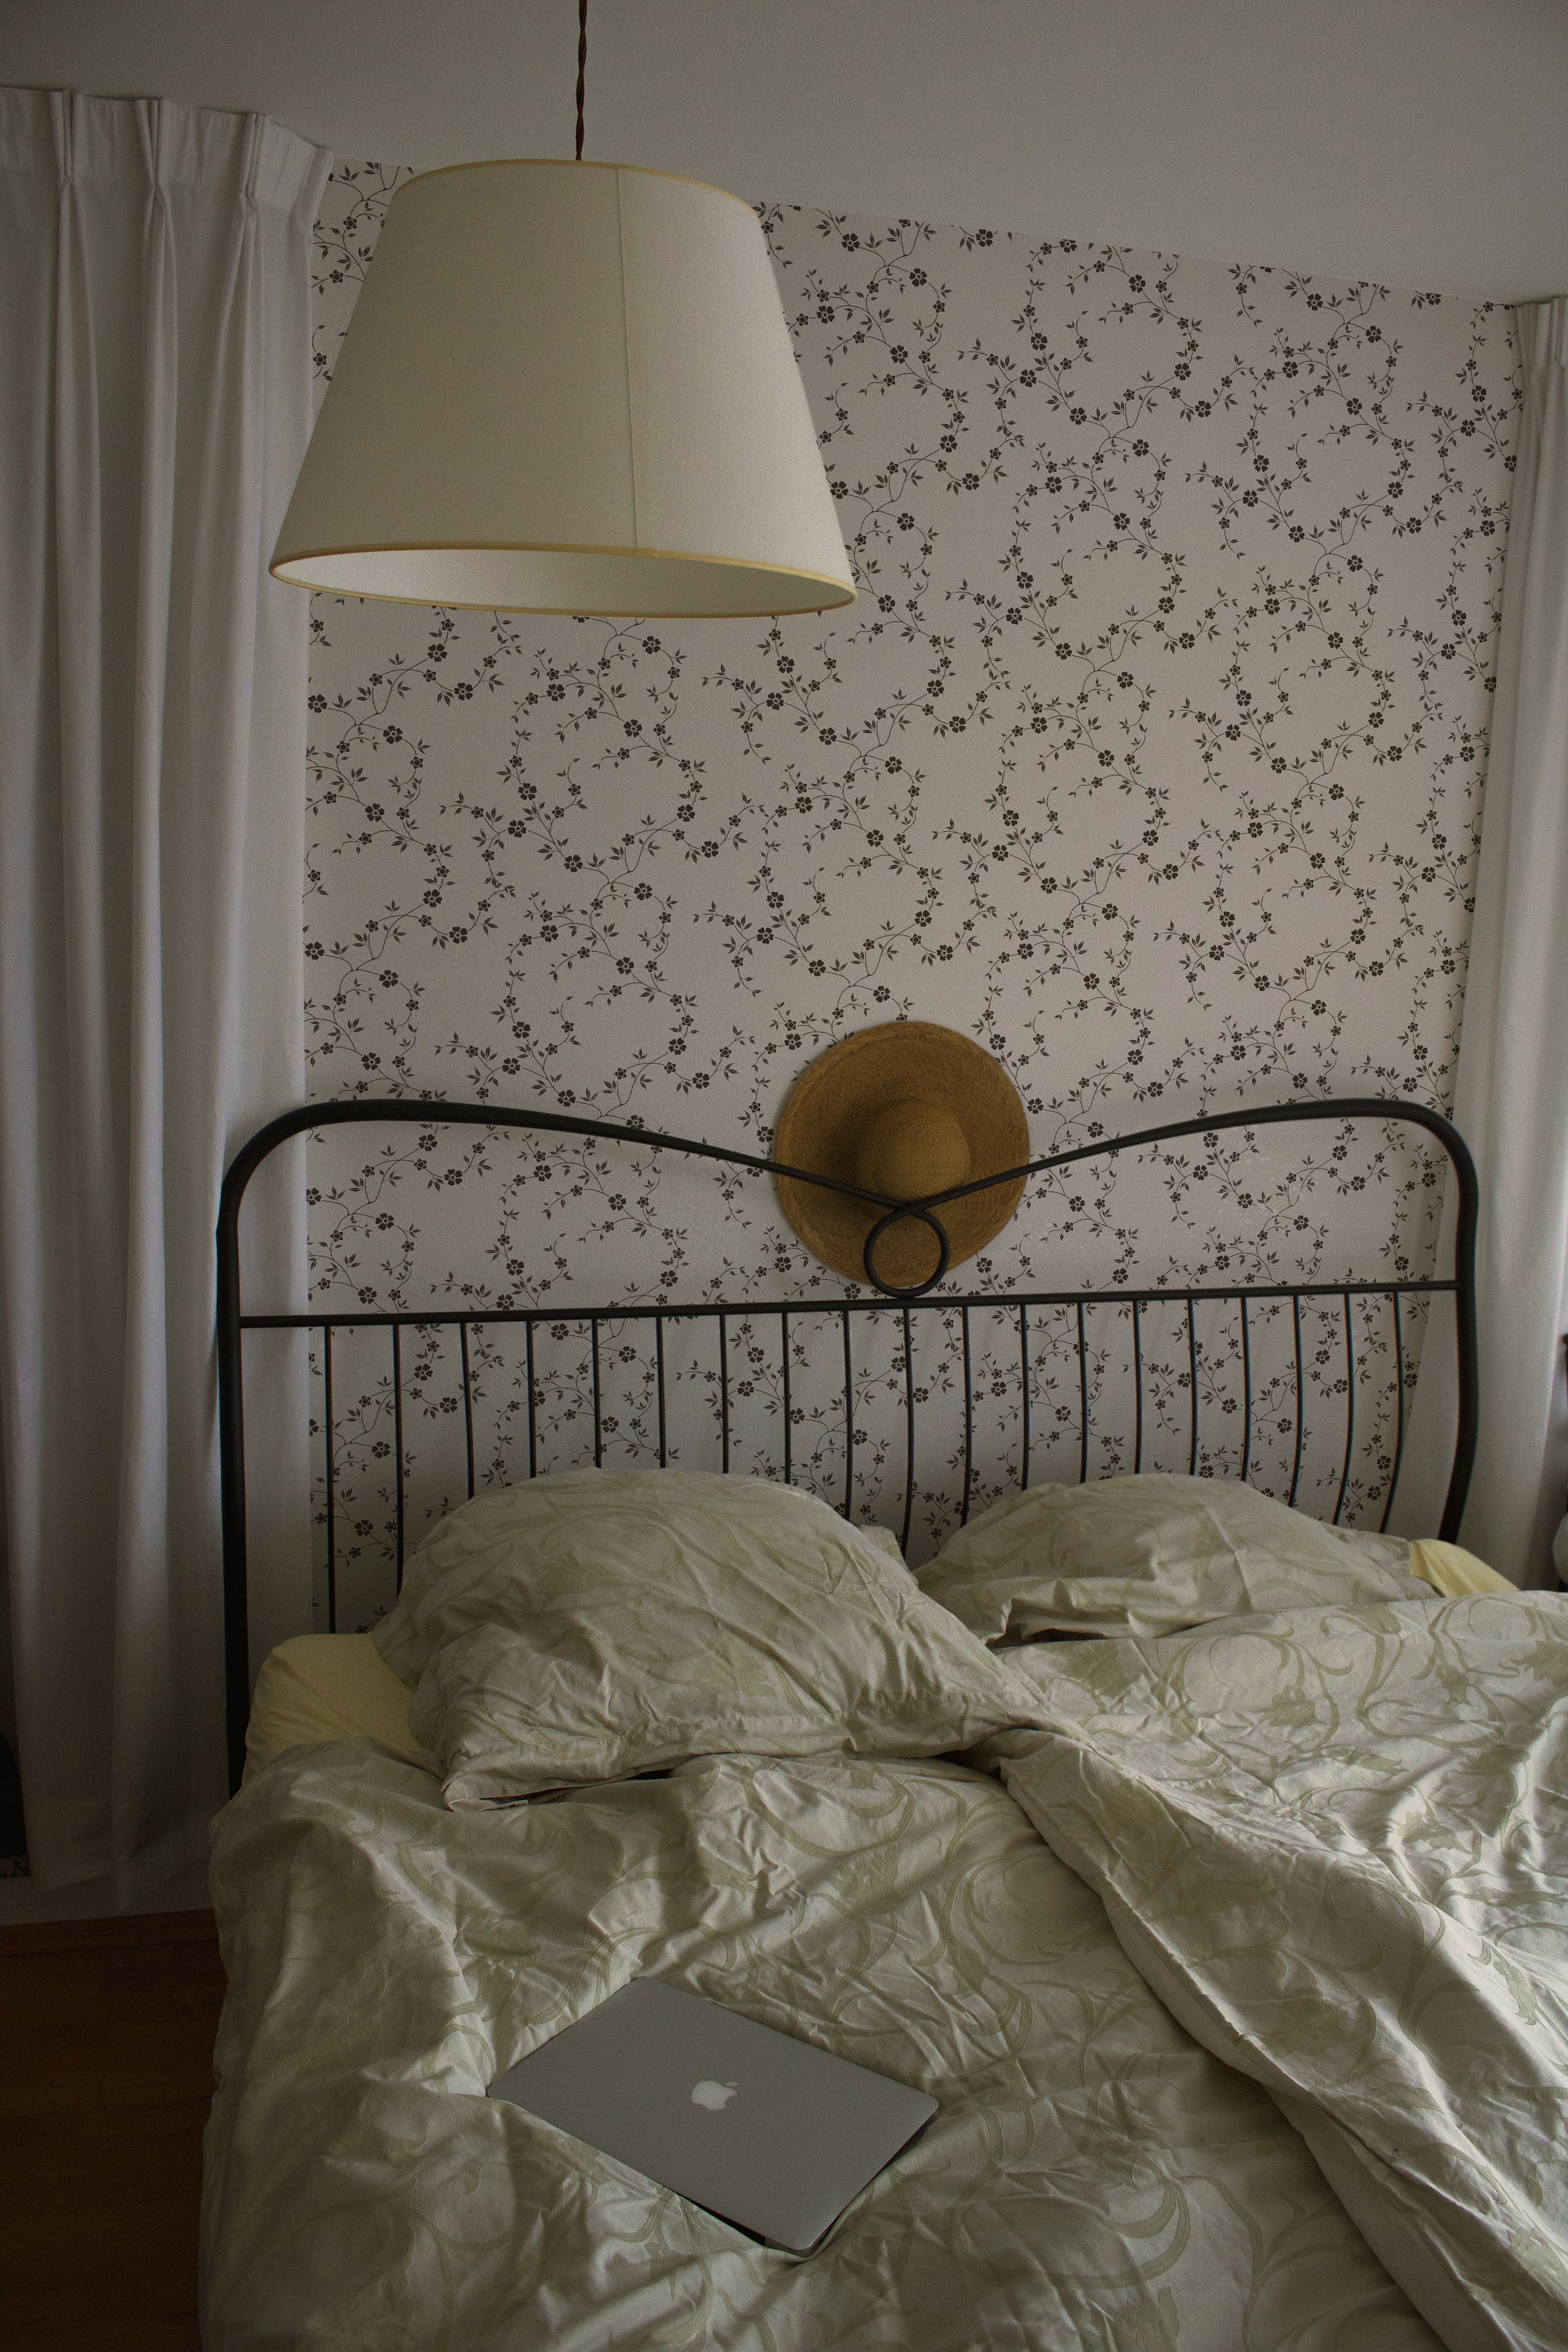 An intimate sleeping area adorned with Charming Floral Wallpaper in Deep Brown. The gentle floral motifs create a peaceful and serene environment, complemented by a simple black metal bed frame and crisp white bedding.